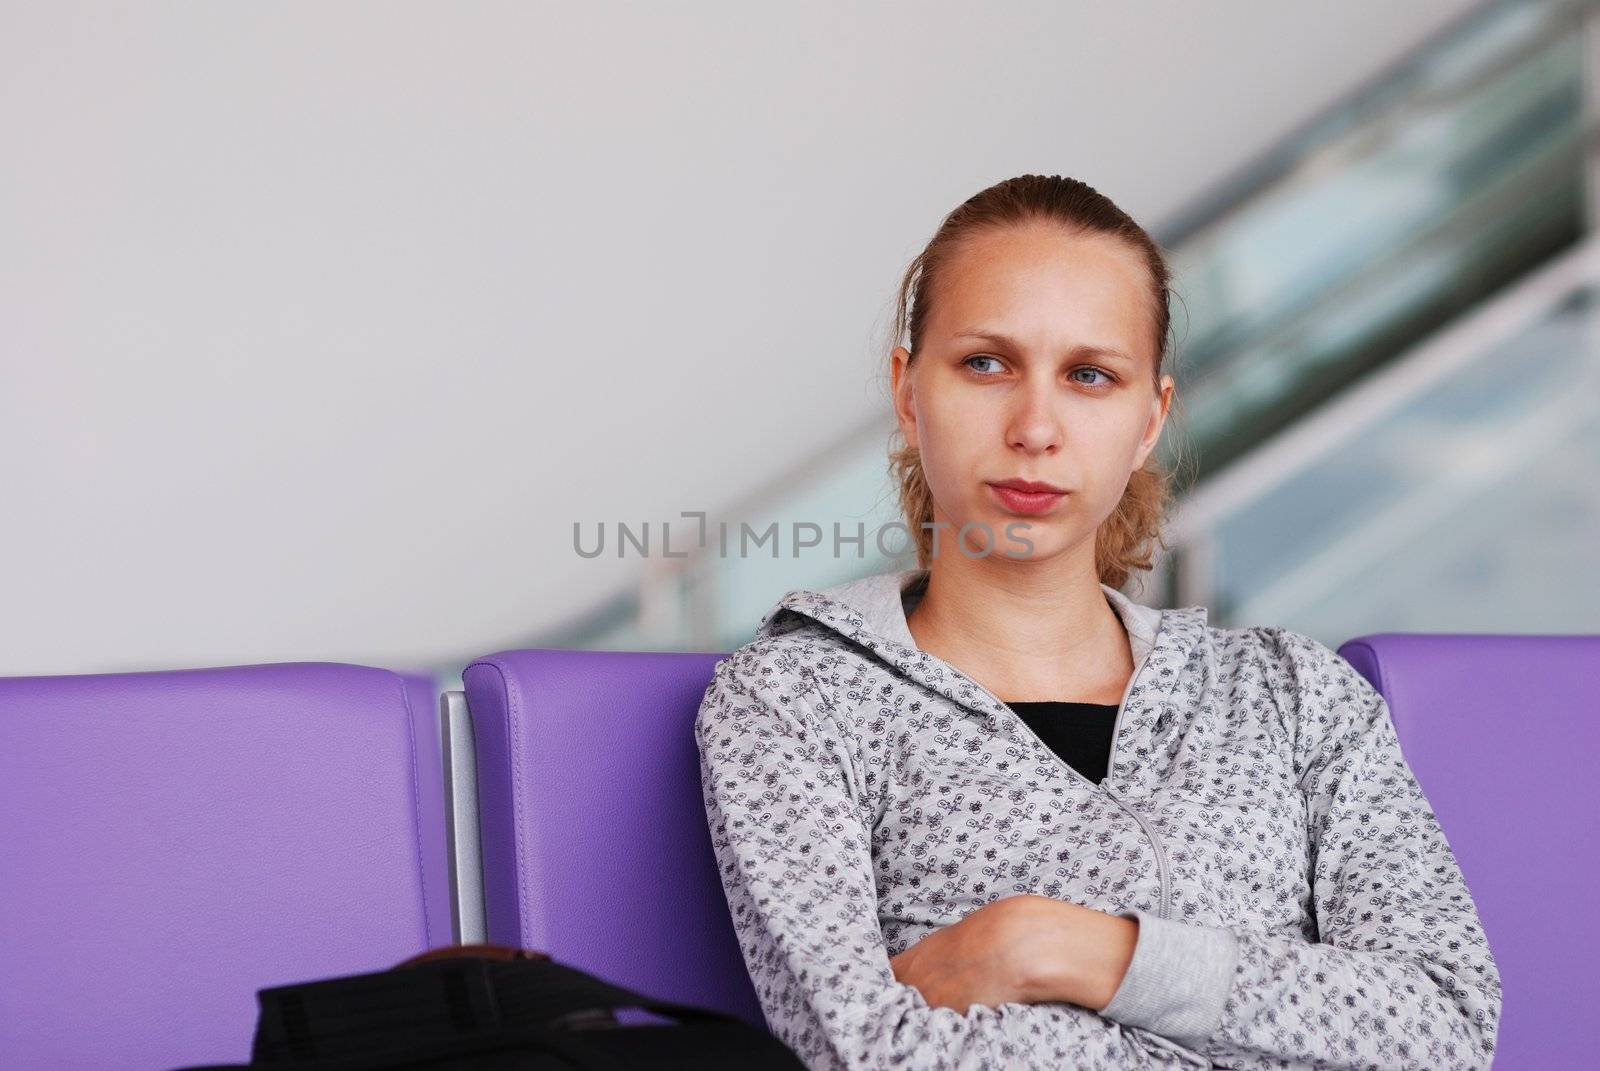 Woman at the airport, shallow DOF